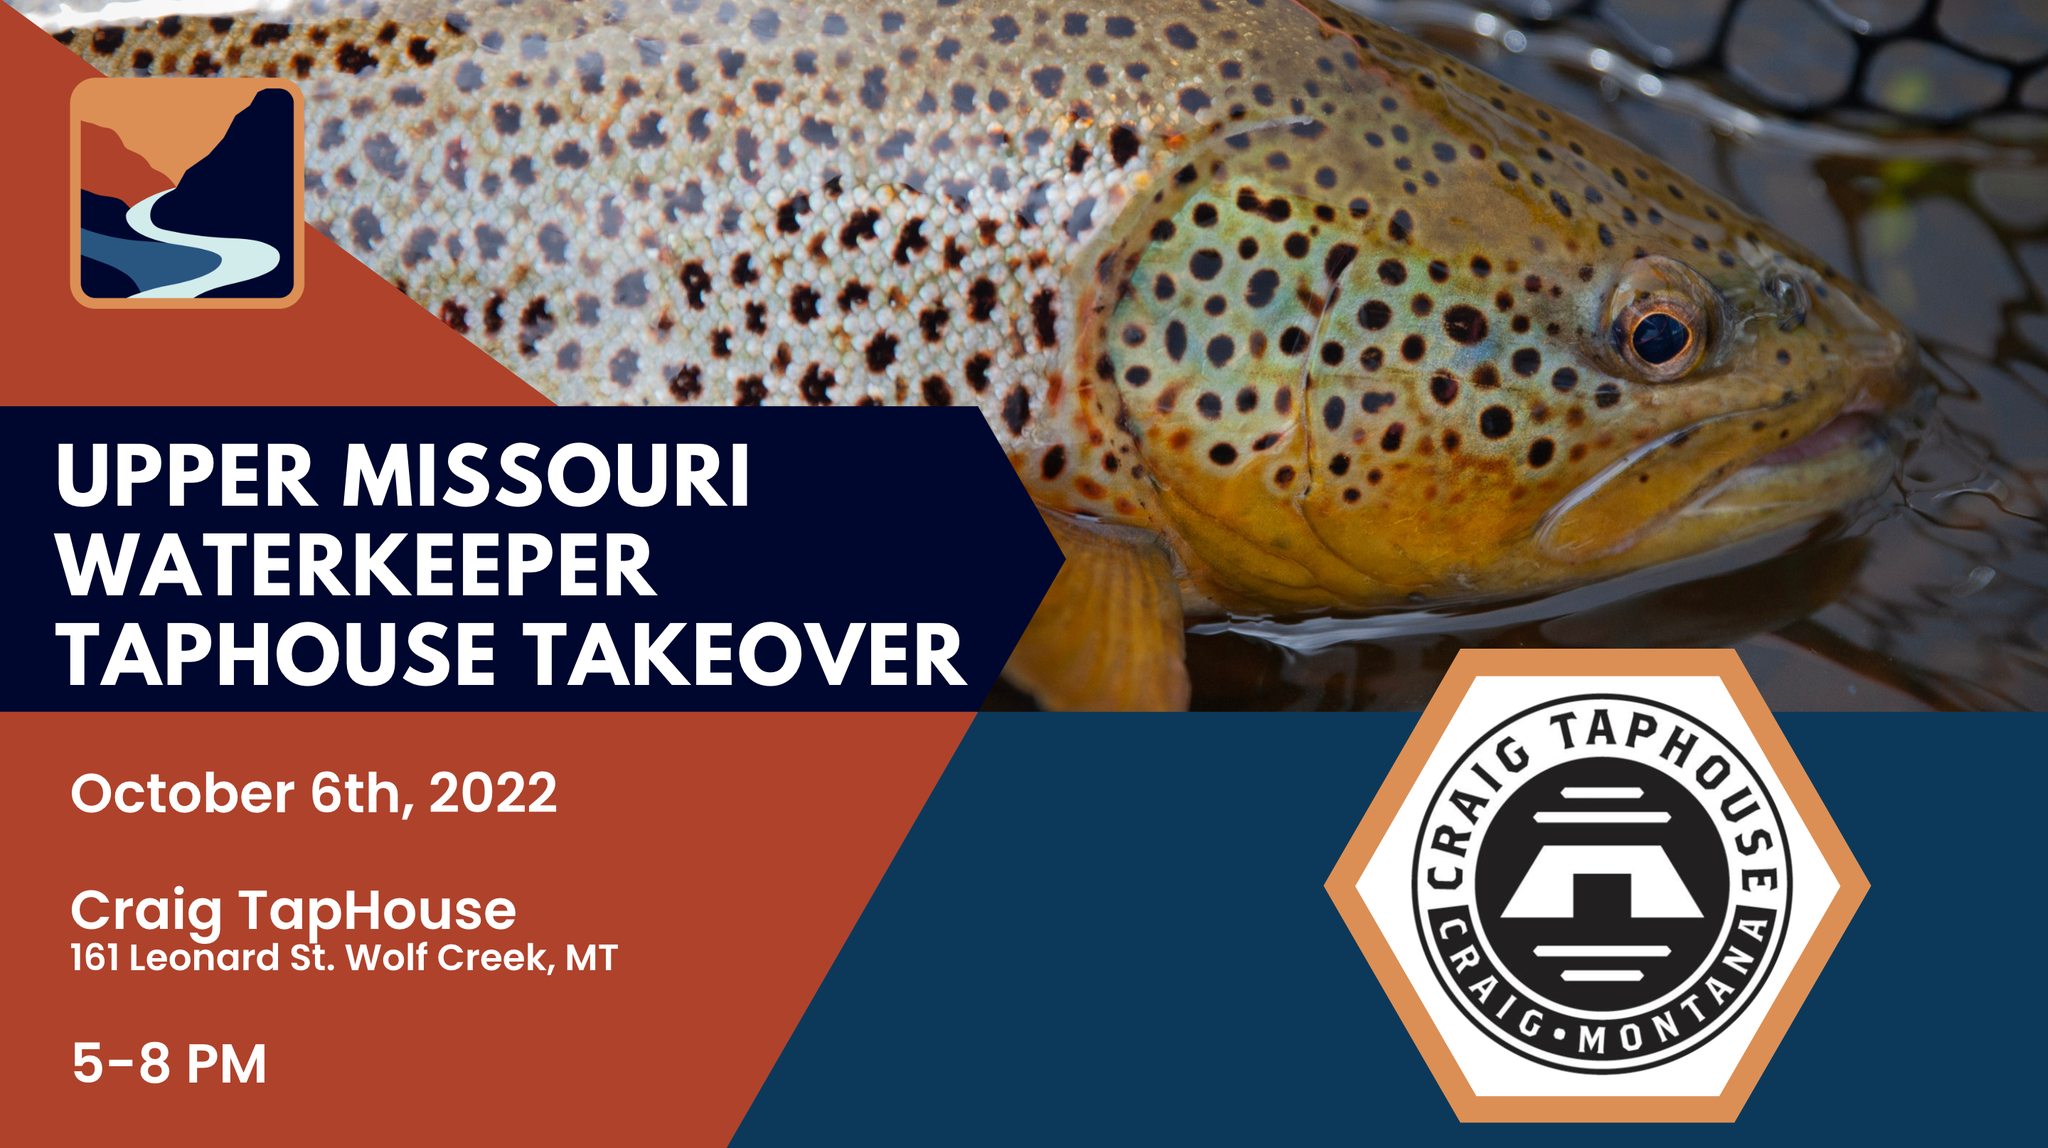 Upper Missouri Water Keepers Craig TapHouse 5-8pm Thursday Oct 6th